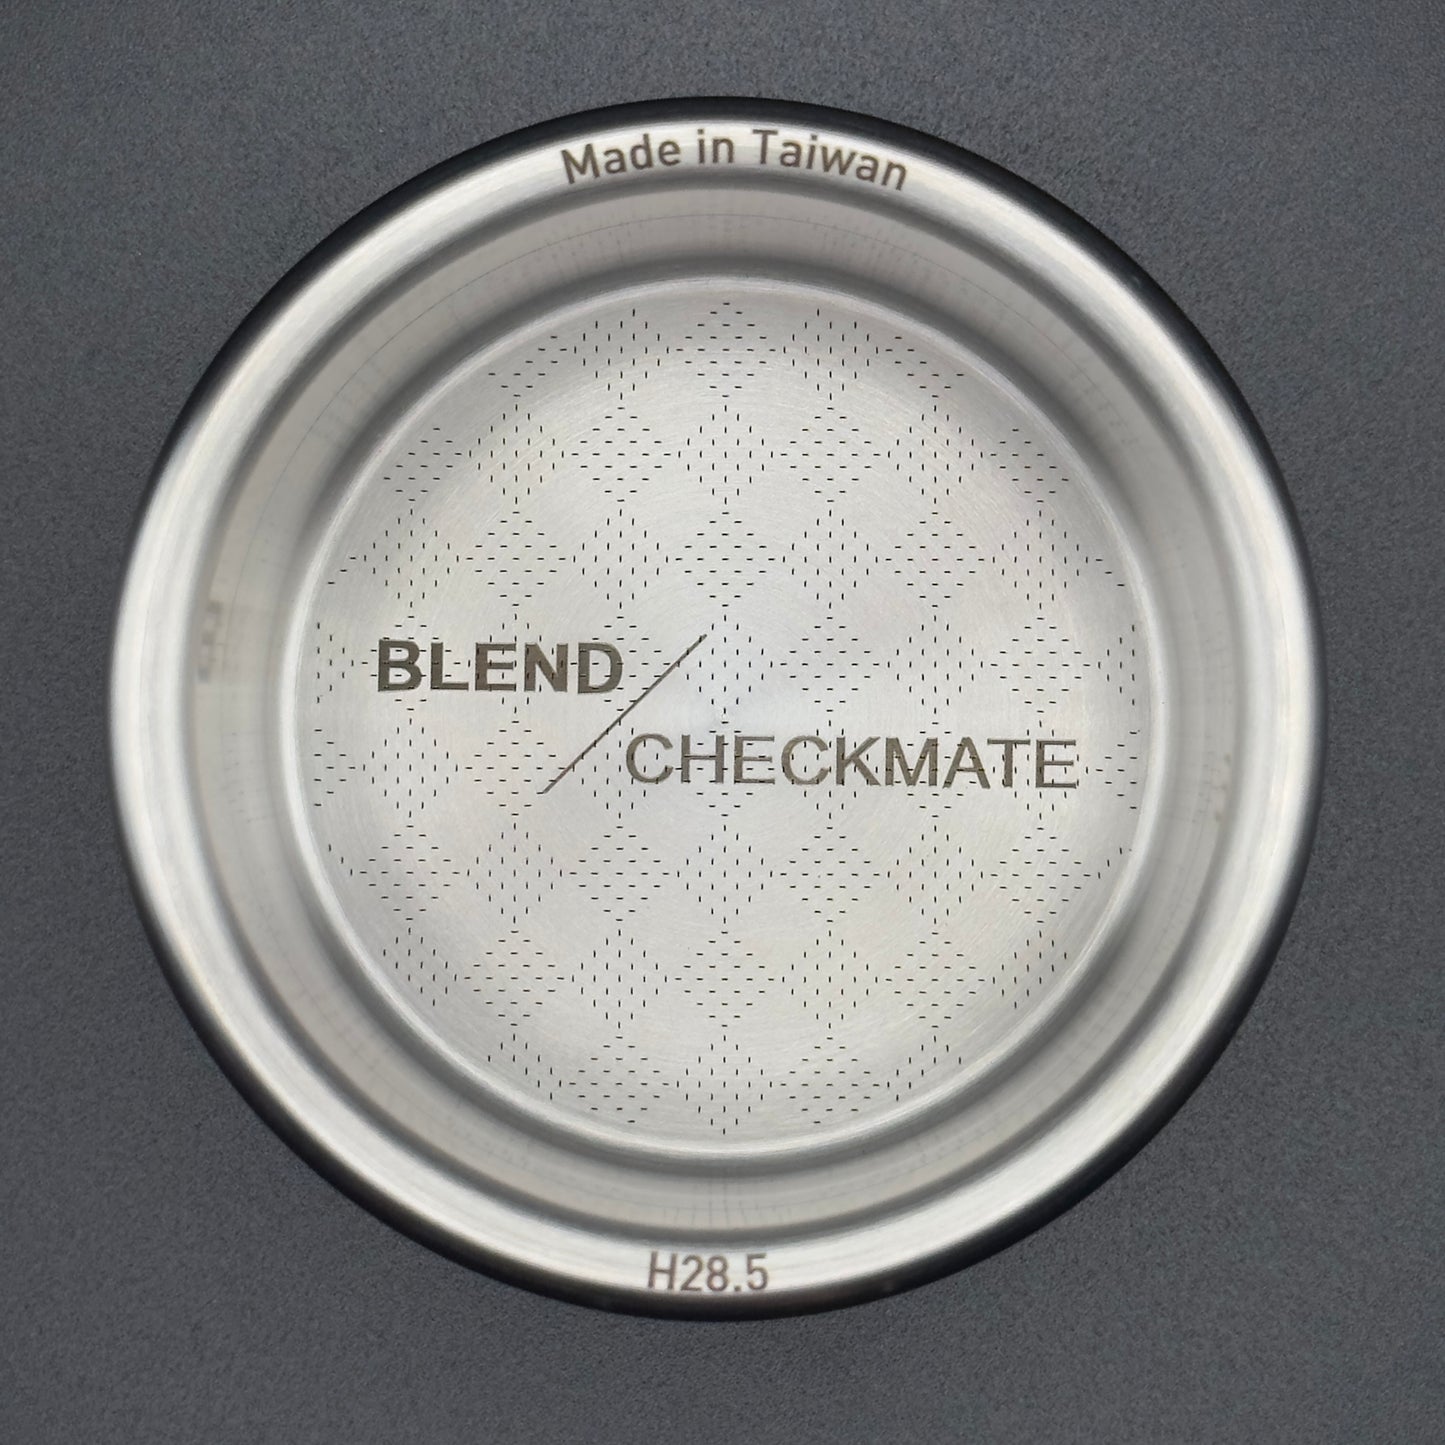 BLEND/CHECKMATE_H28.5/22g